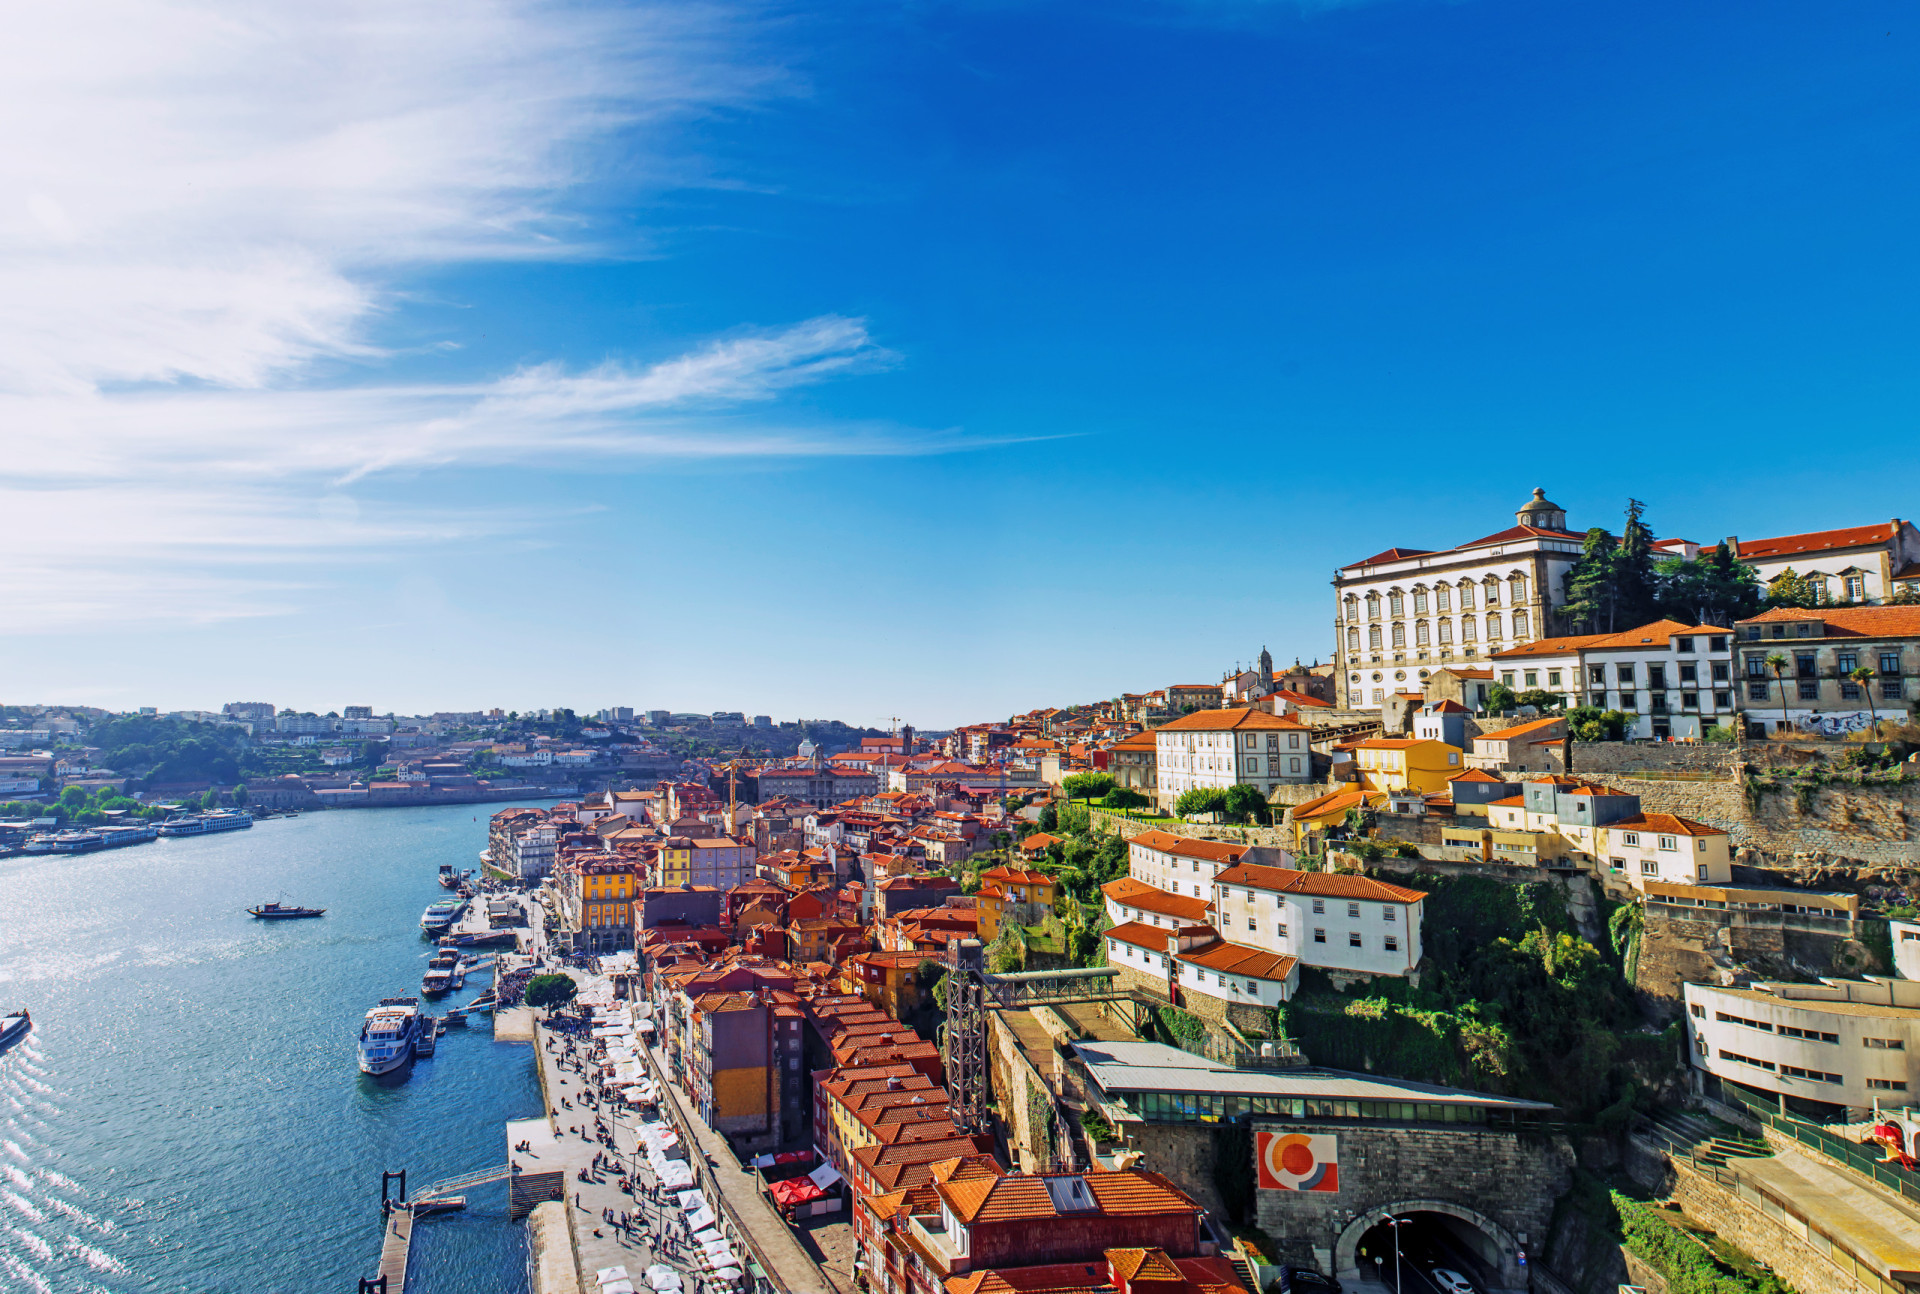 <p>Portugal has a low tourist tax of €2 (US$2.18) per night, which applies to all those over the age of 13. It applies in 13 Portuguese municipalities, including <a href="https://www.starsinsider.com/travel/233123/best-solo-travel-destinations-in-europe" rel="noopener">Lisbon</a> and Porto.</p><p>You may also like:<a href="https://www.starsinsider.com/n/404240?utm_source=msn.com&utm_medium=display&utm_campaign=referral_description&utm_content=683481en-my"> Evel Knievel: Remembering the motorcycle stunt legend</a></p>